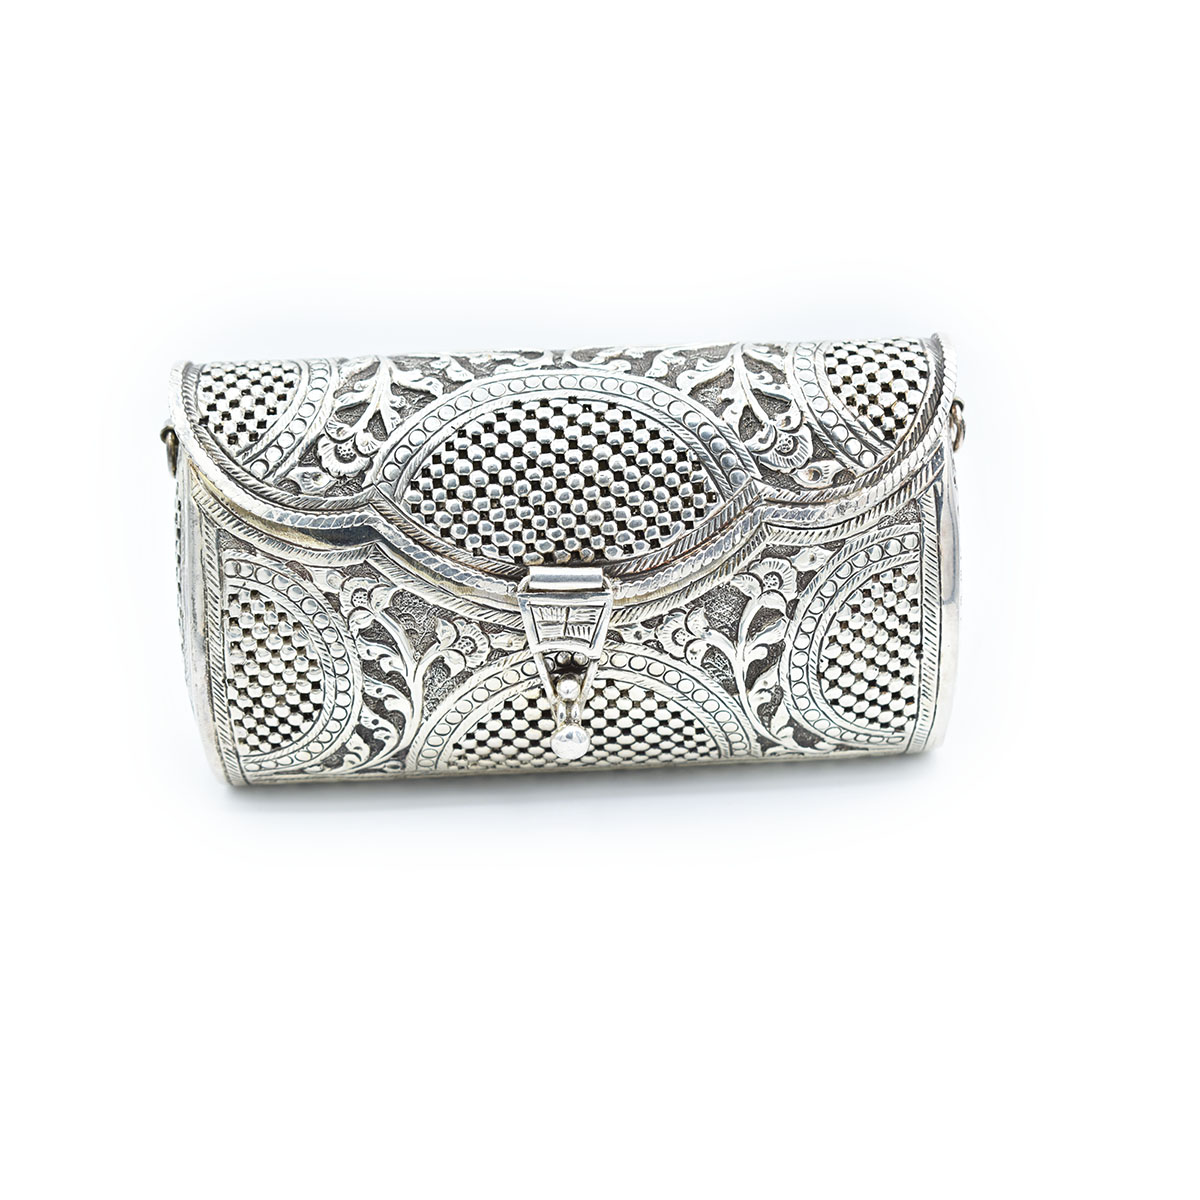 Antique Sterling Silver Purse Ornate Woven Diamond Hallmarked Signed - Etsy